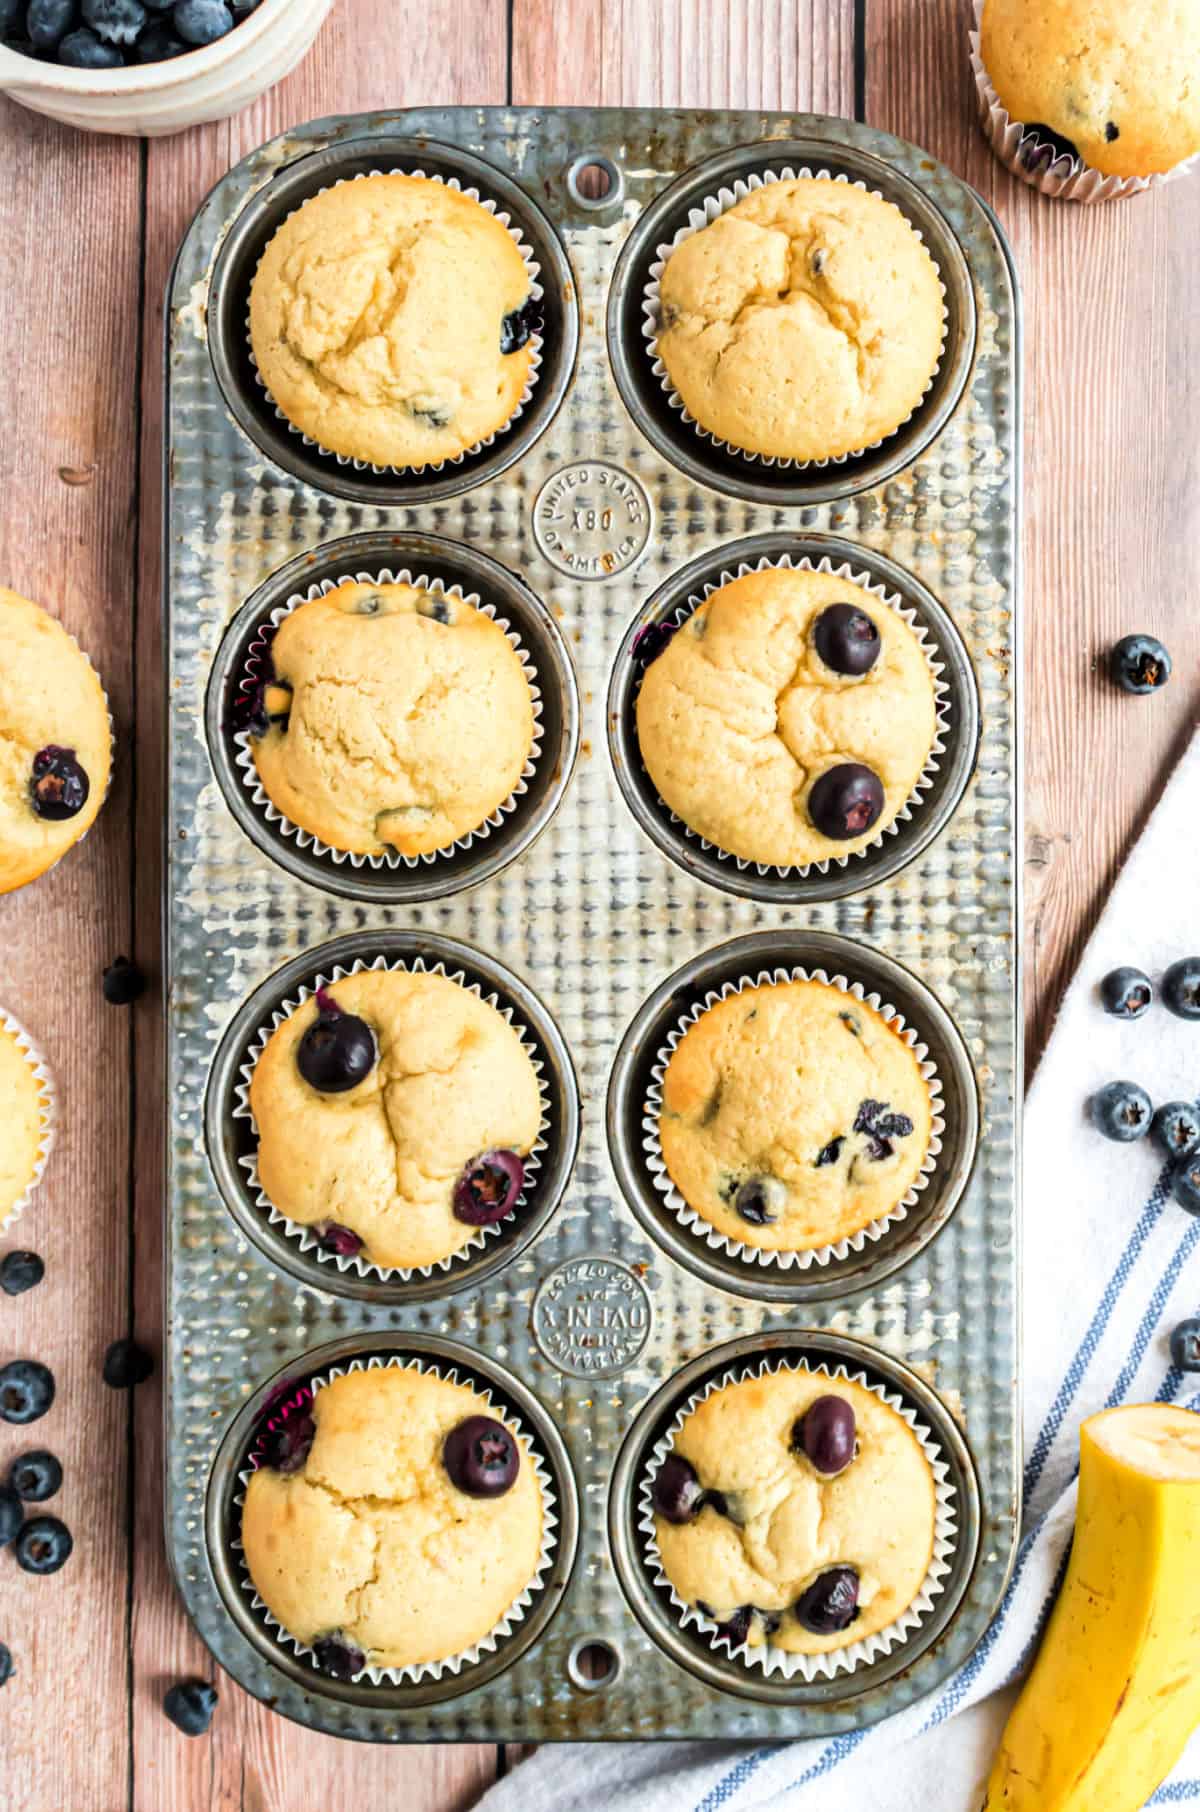 Blueberry banana muffins in a metal muffin tin.